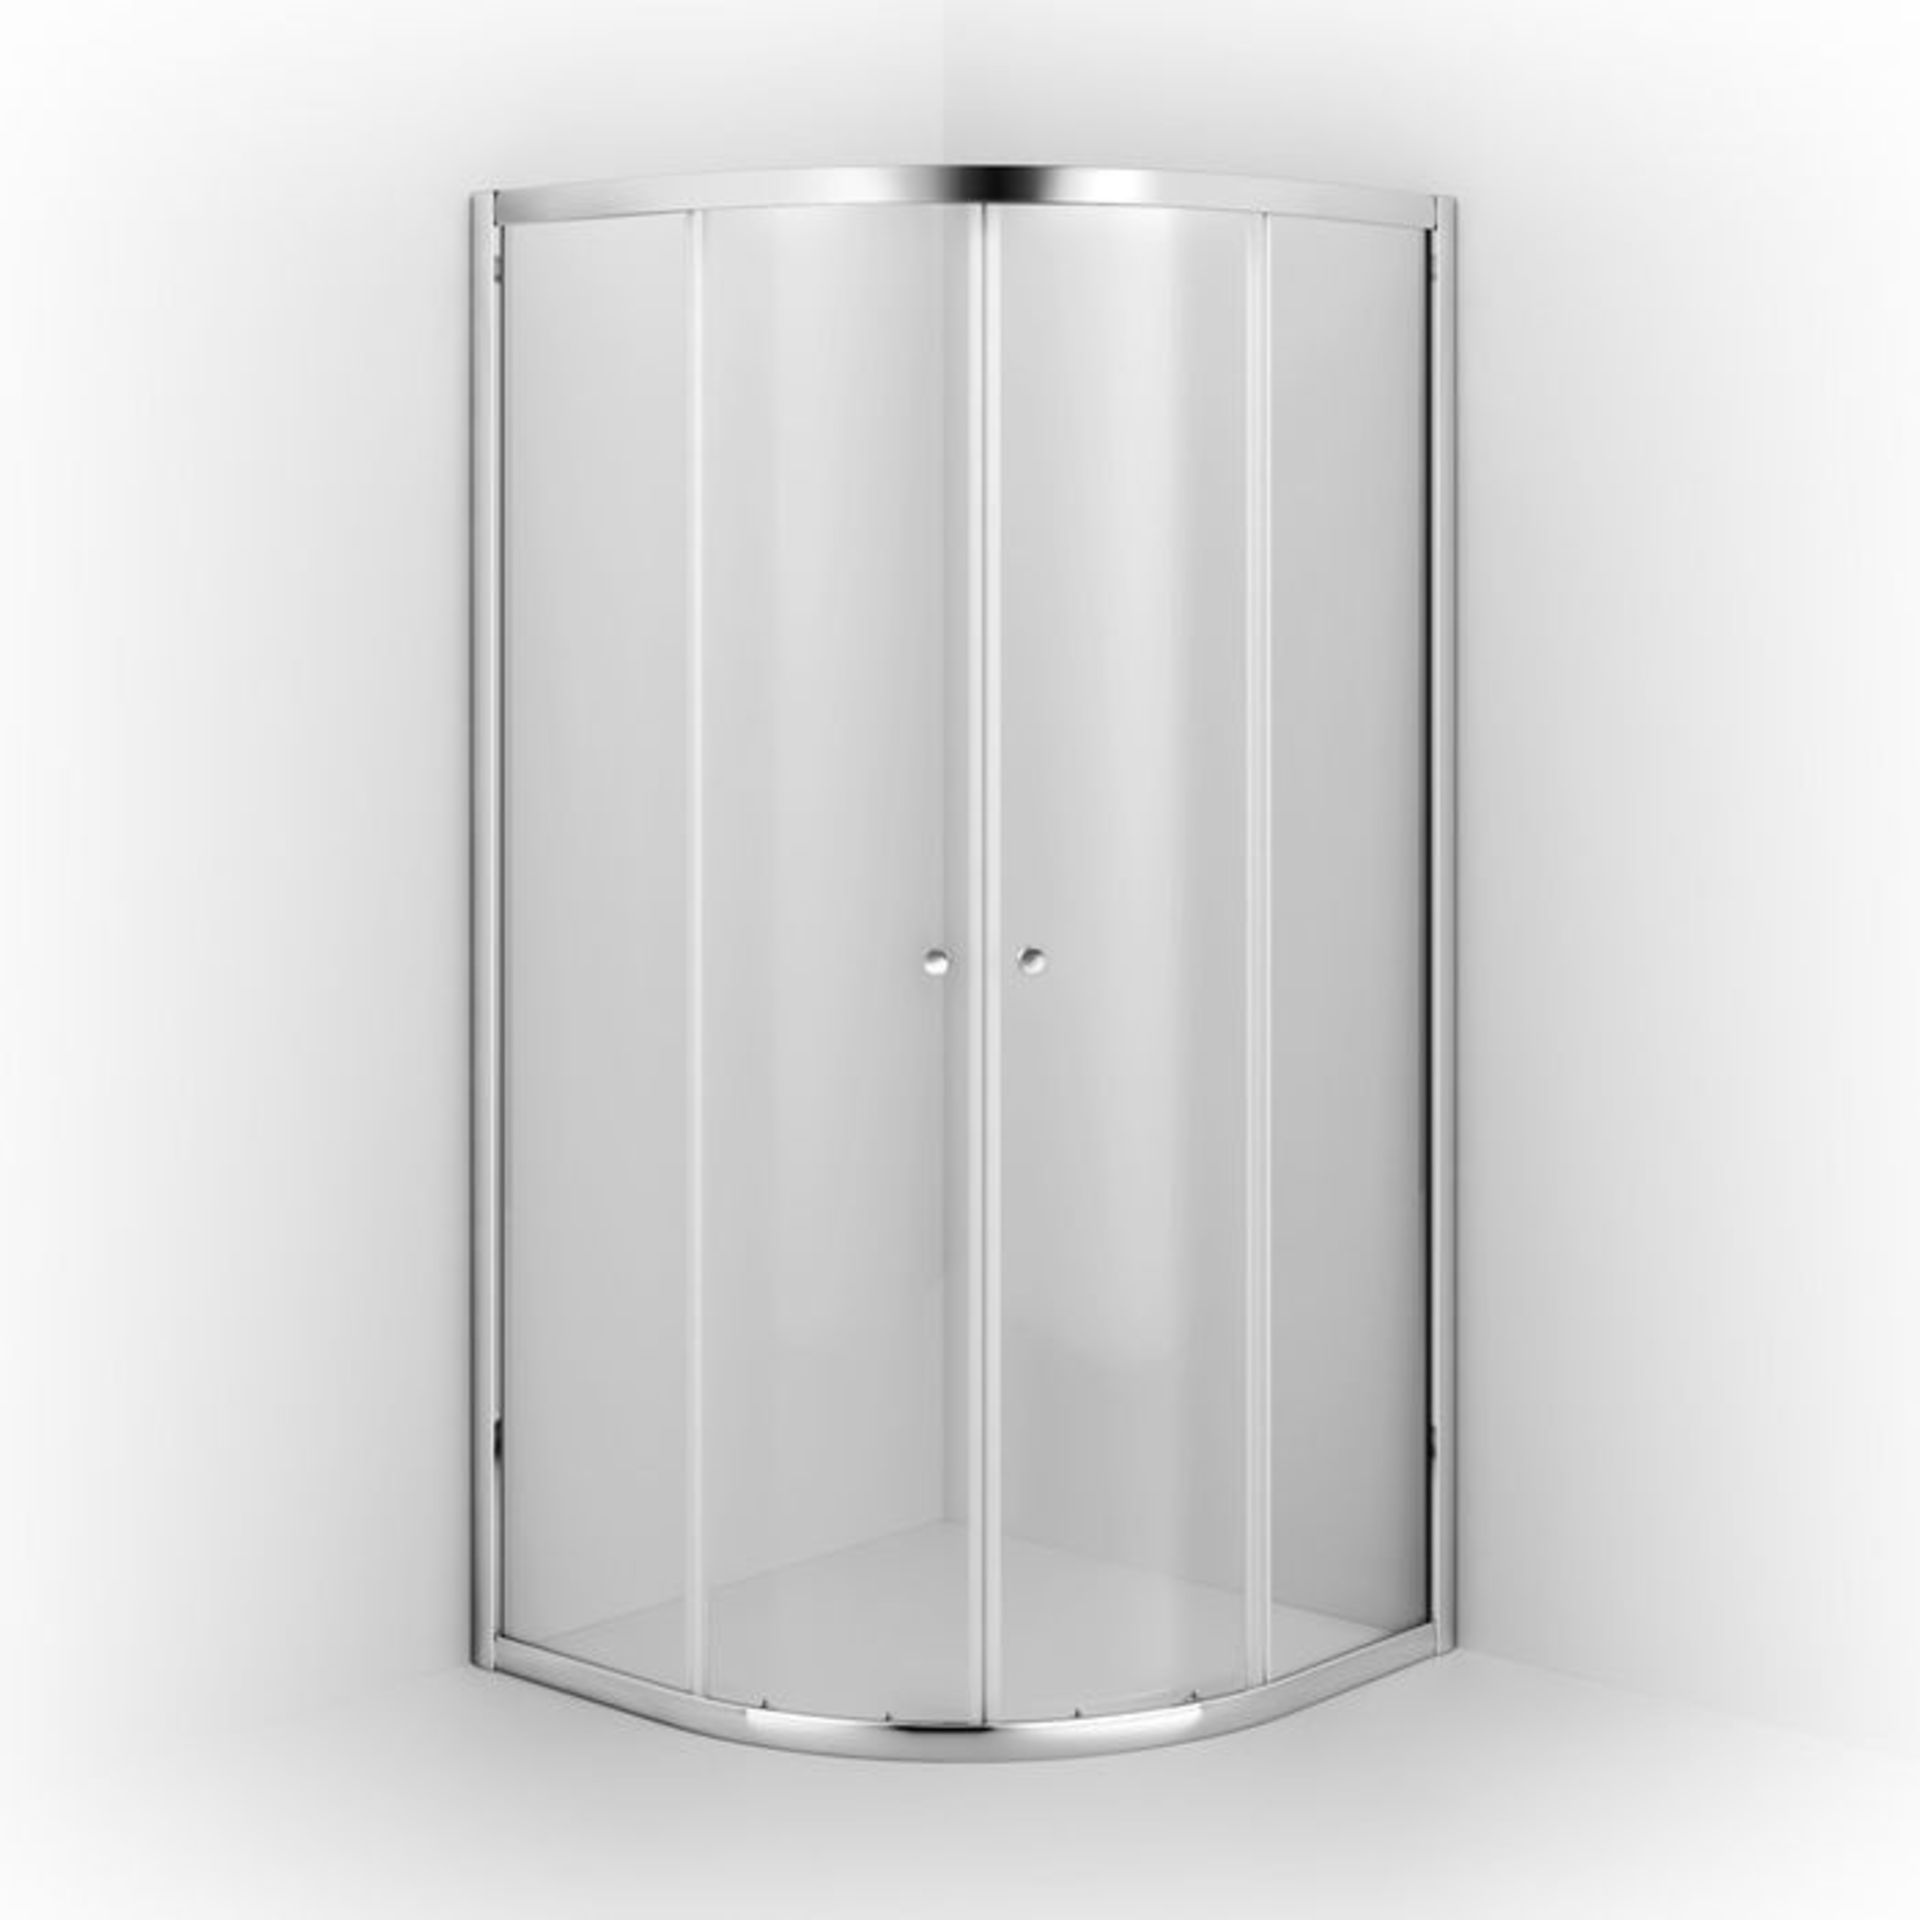 (DK262) 900x900mm - Elements Quadrant Shower Enclosure. 4mm Safety Glass Fully waterproof tested - Image 5 of 5